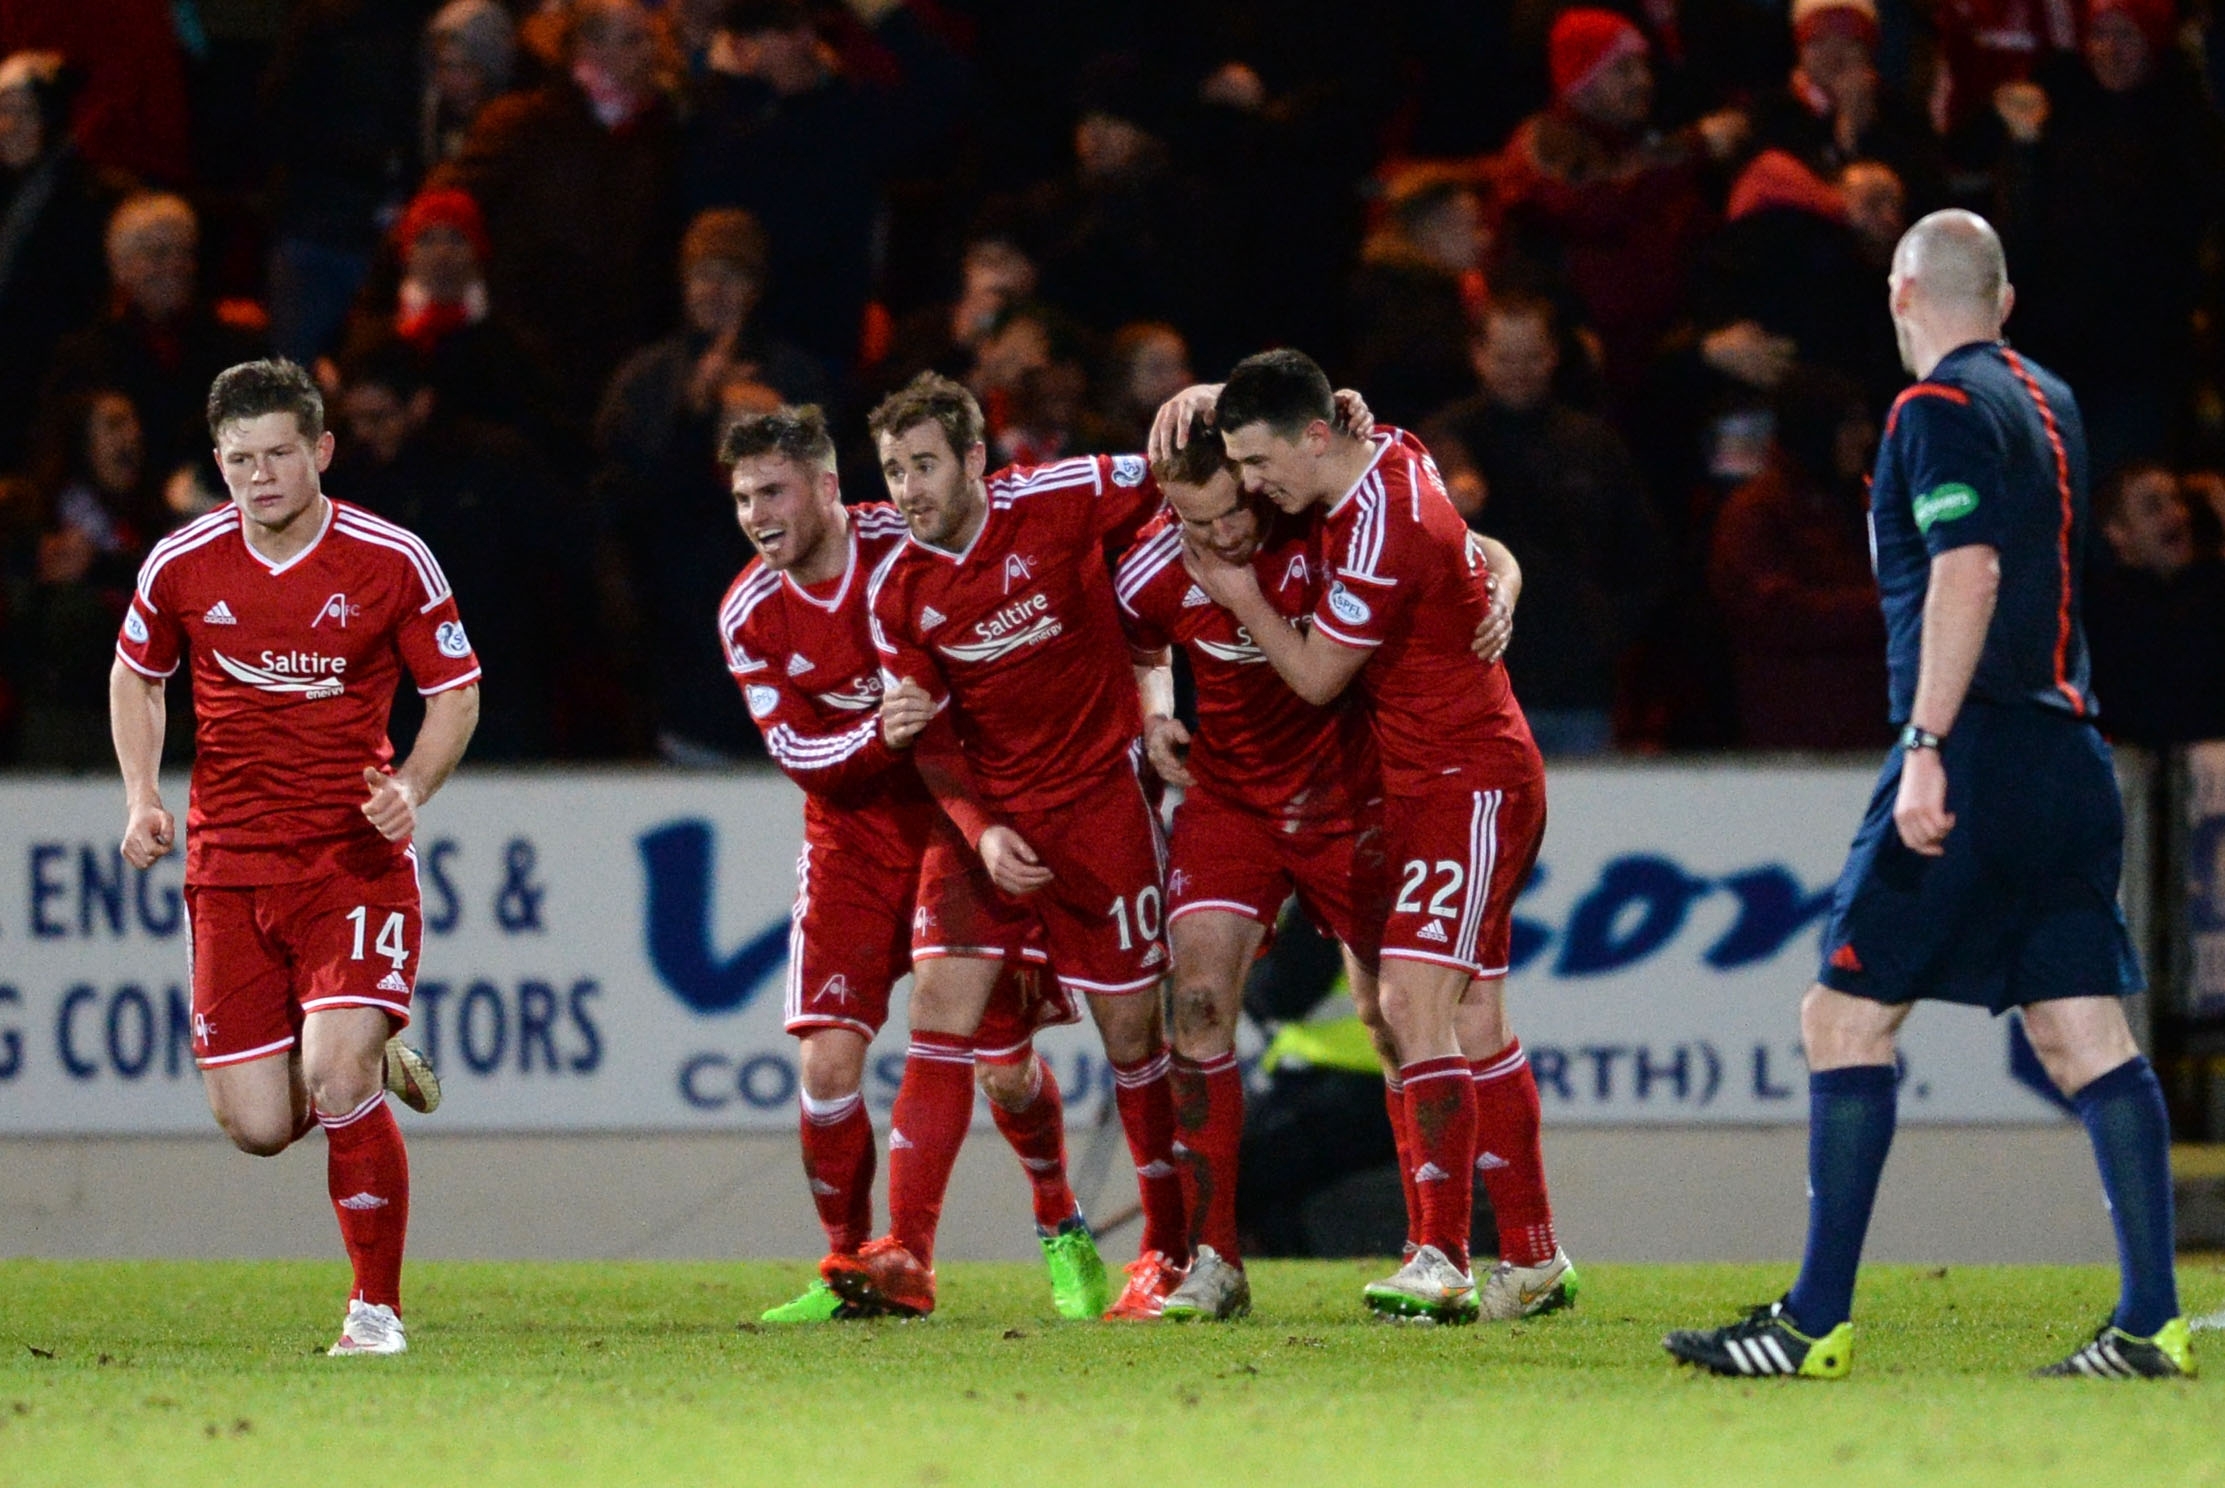 Three Aberdeen games have been selected for live TV